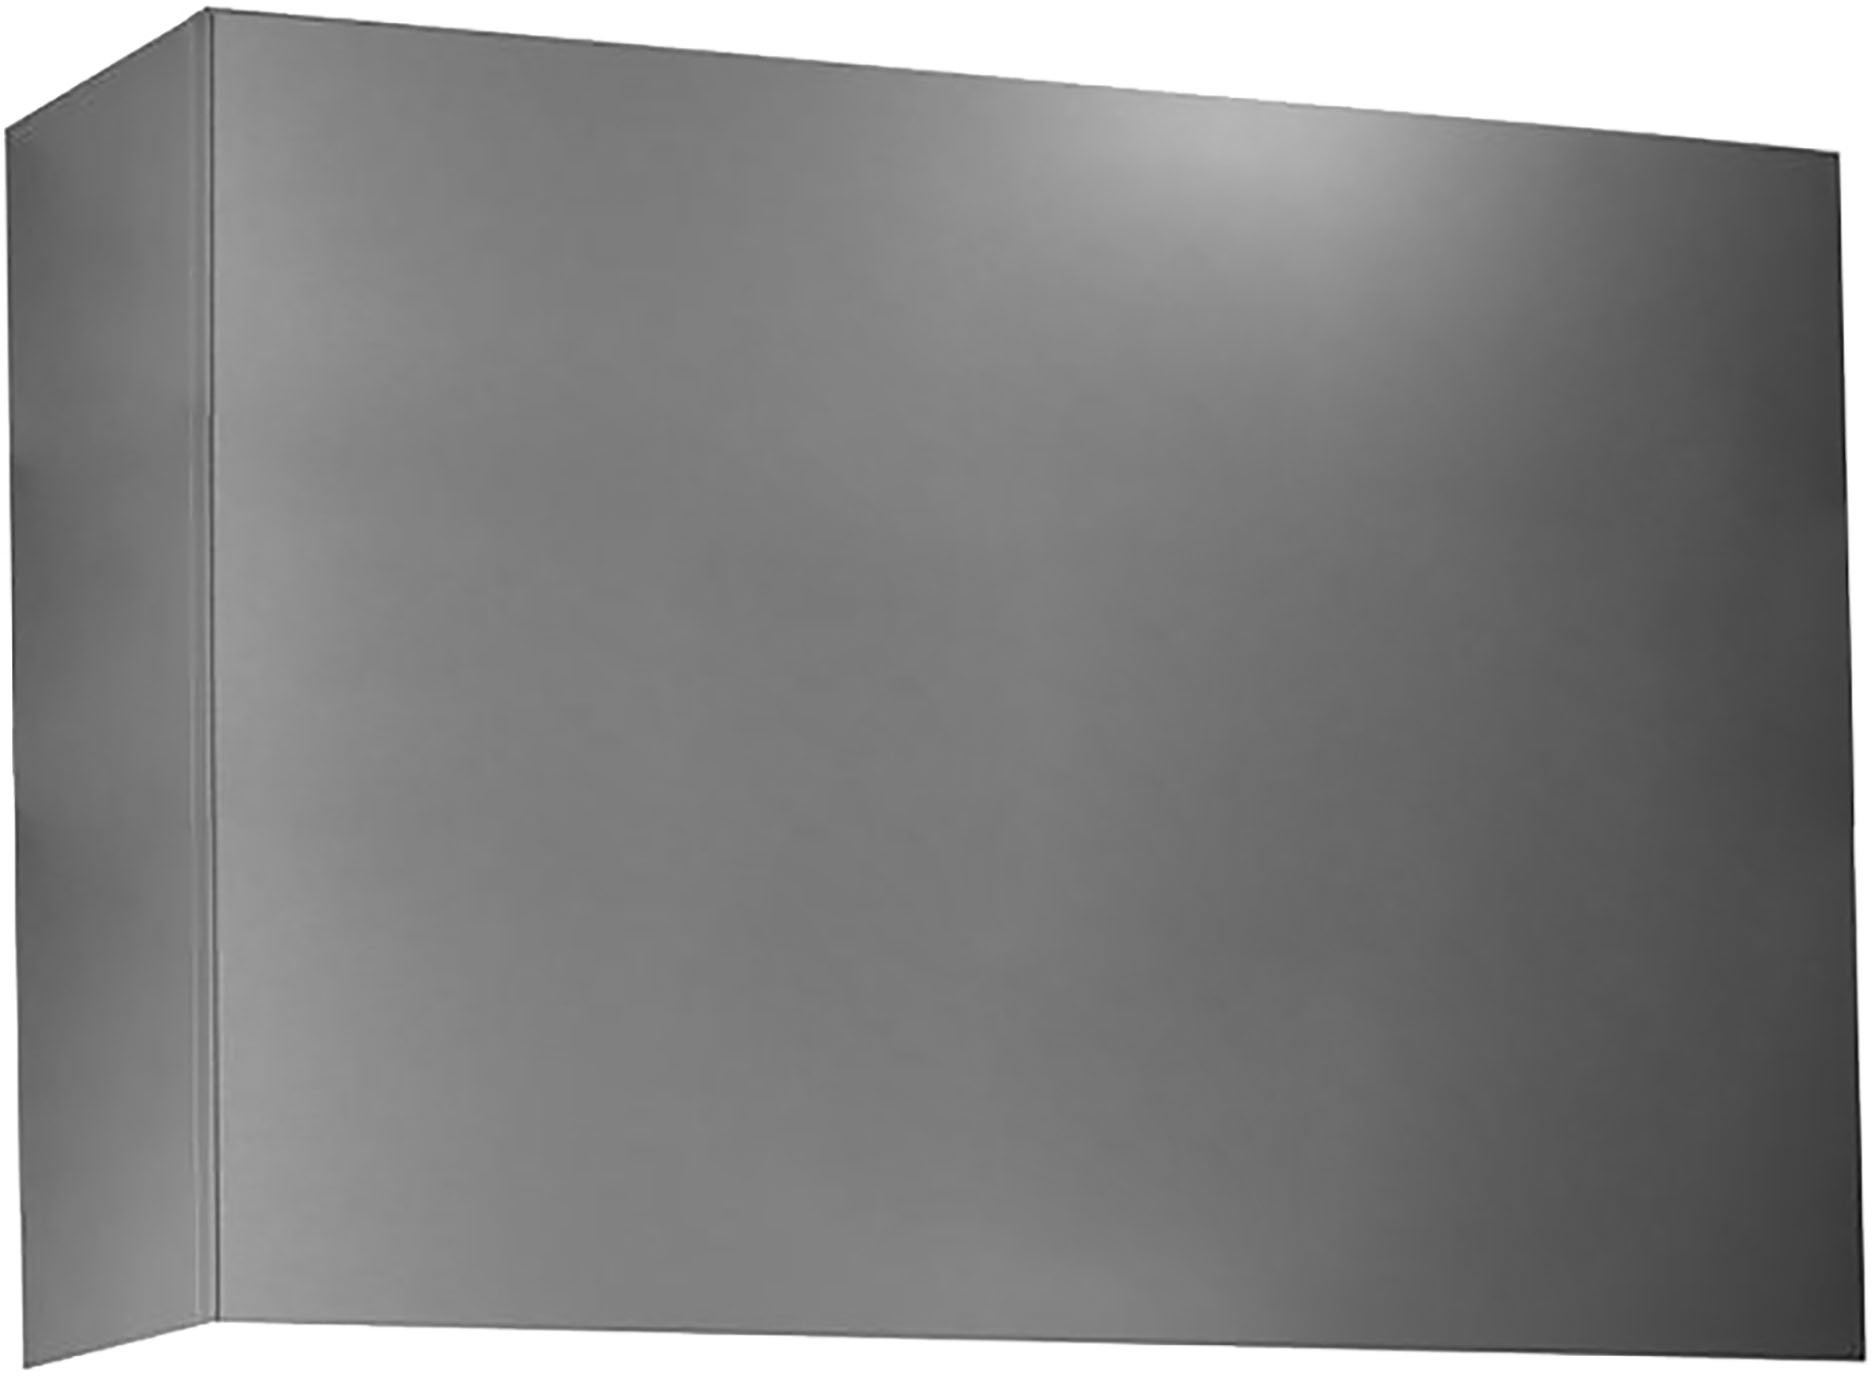 Angle View: Zephyr - Duct Cover Extension for AK7000CS and AK7500CS in Stainless Steel for Range Hood - Stainless steel